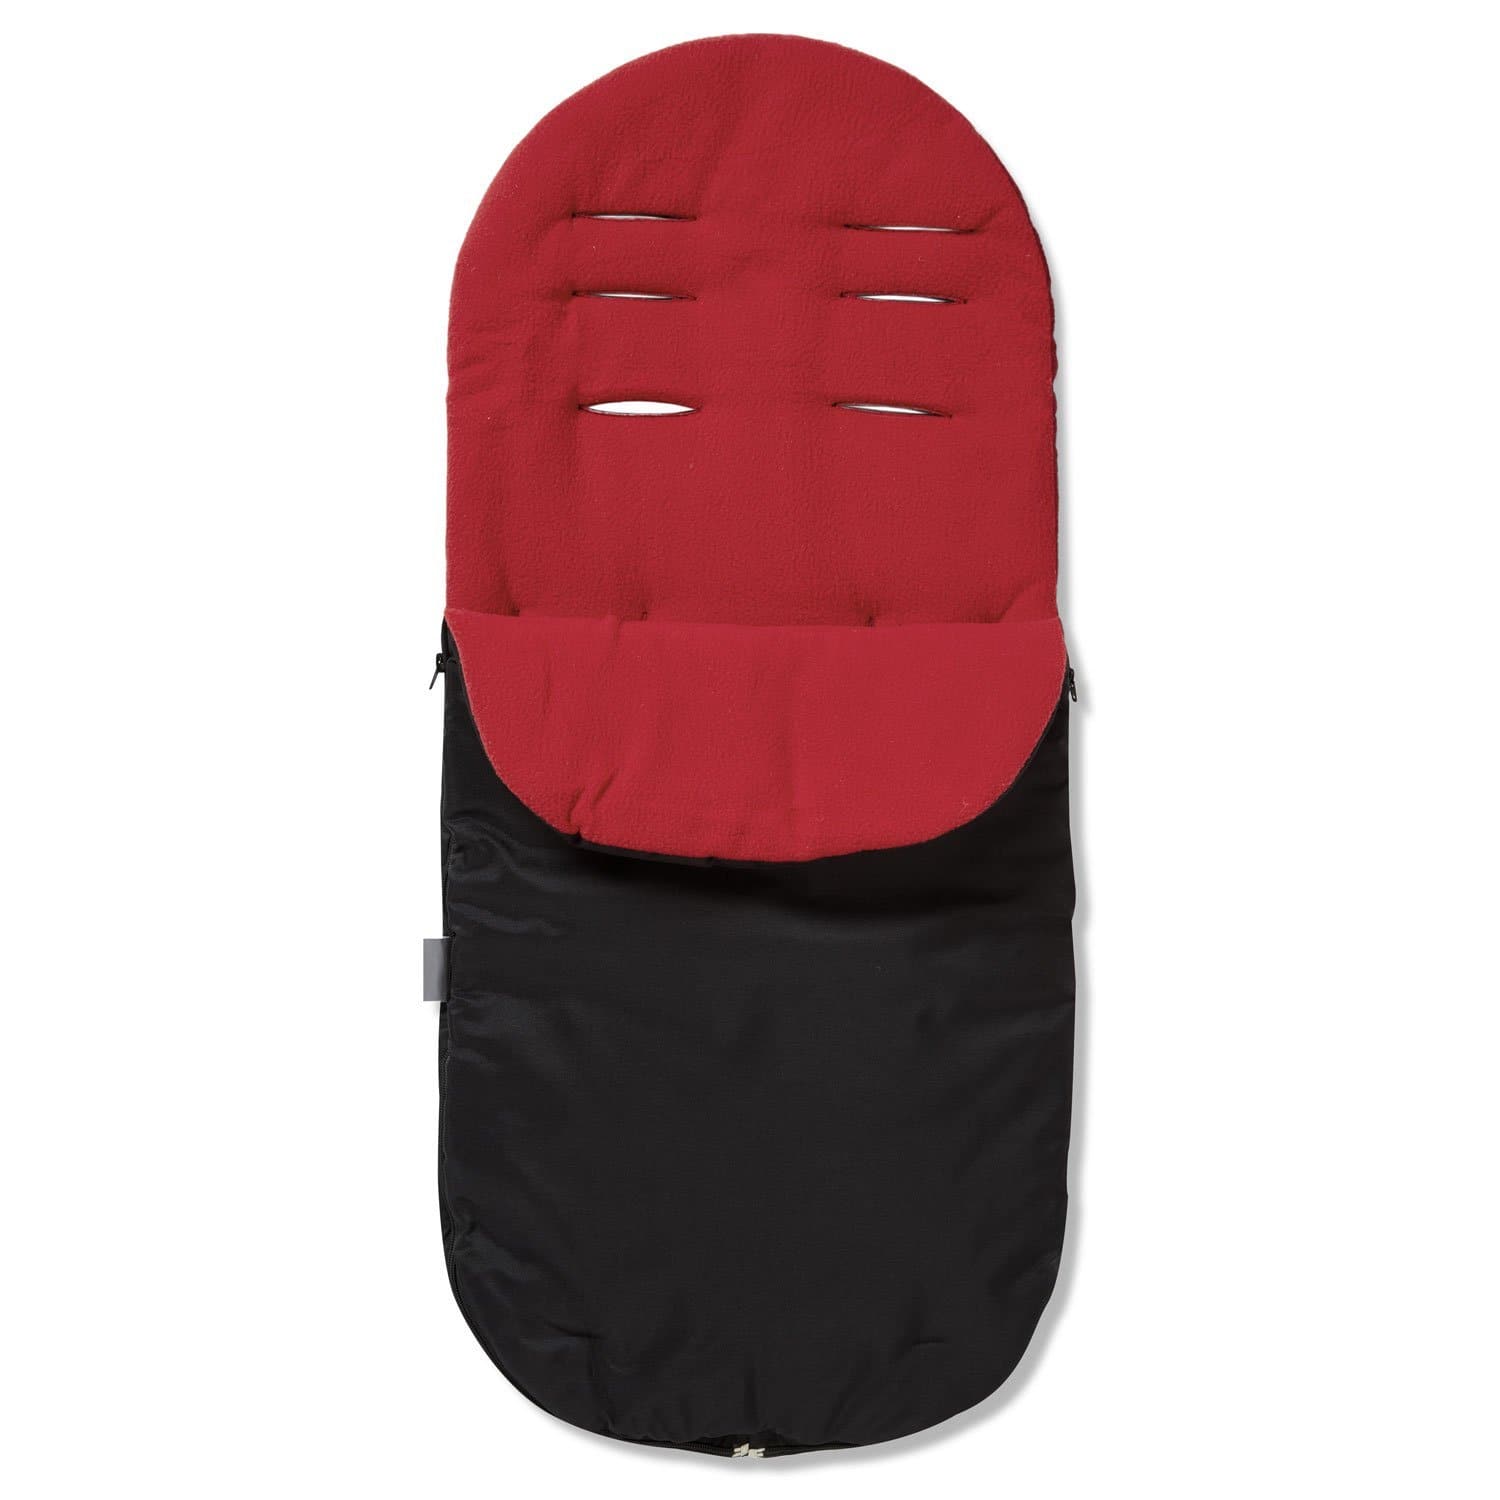 Footmuff / Cosy Toes Compatible with Noukies - Red / Fits All Models | For Your Little One